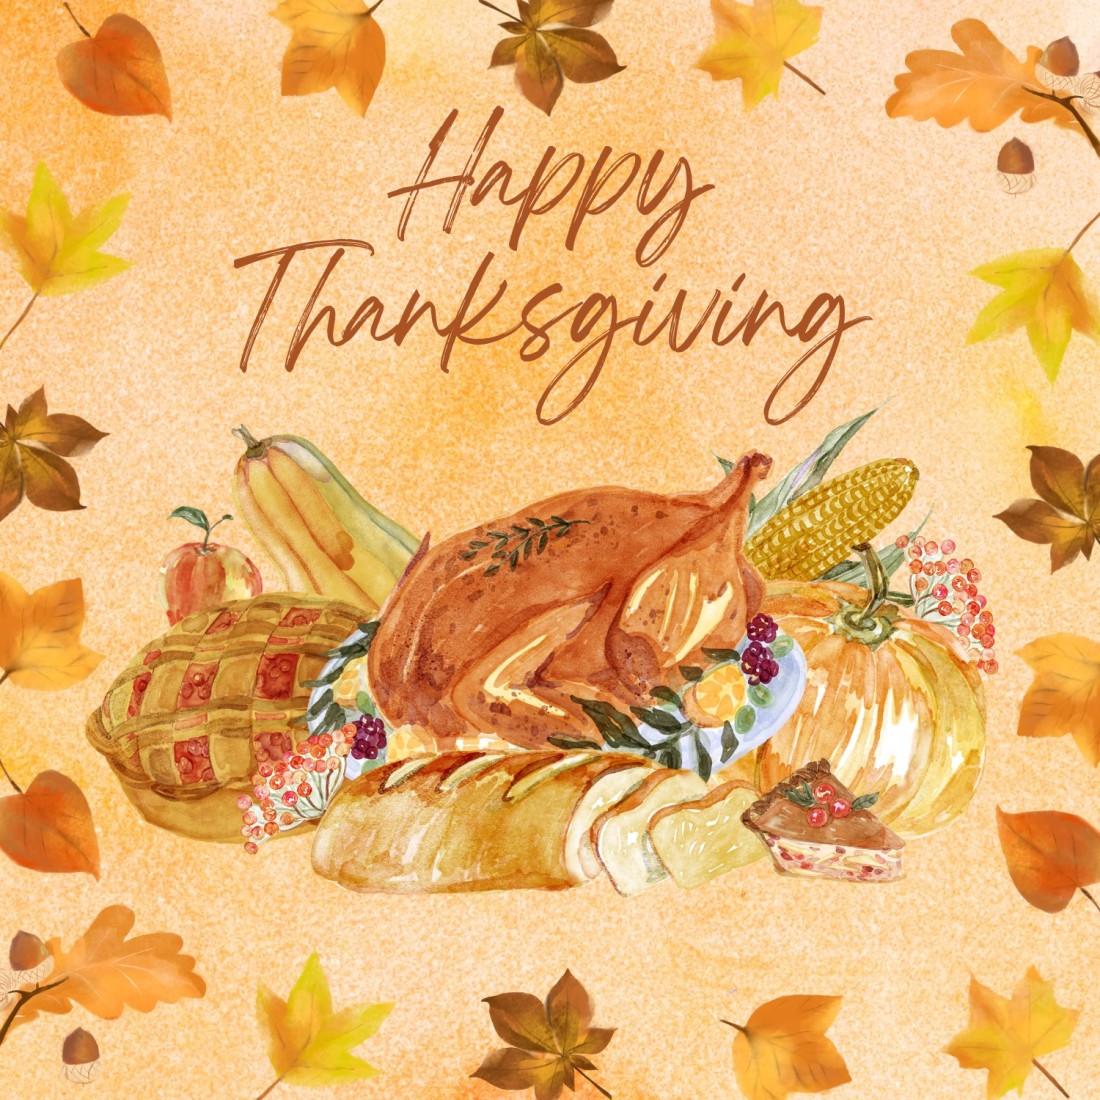 Only for $5 Best ThanksGiving Cards and wishes preview image.